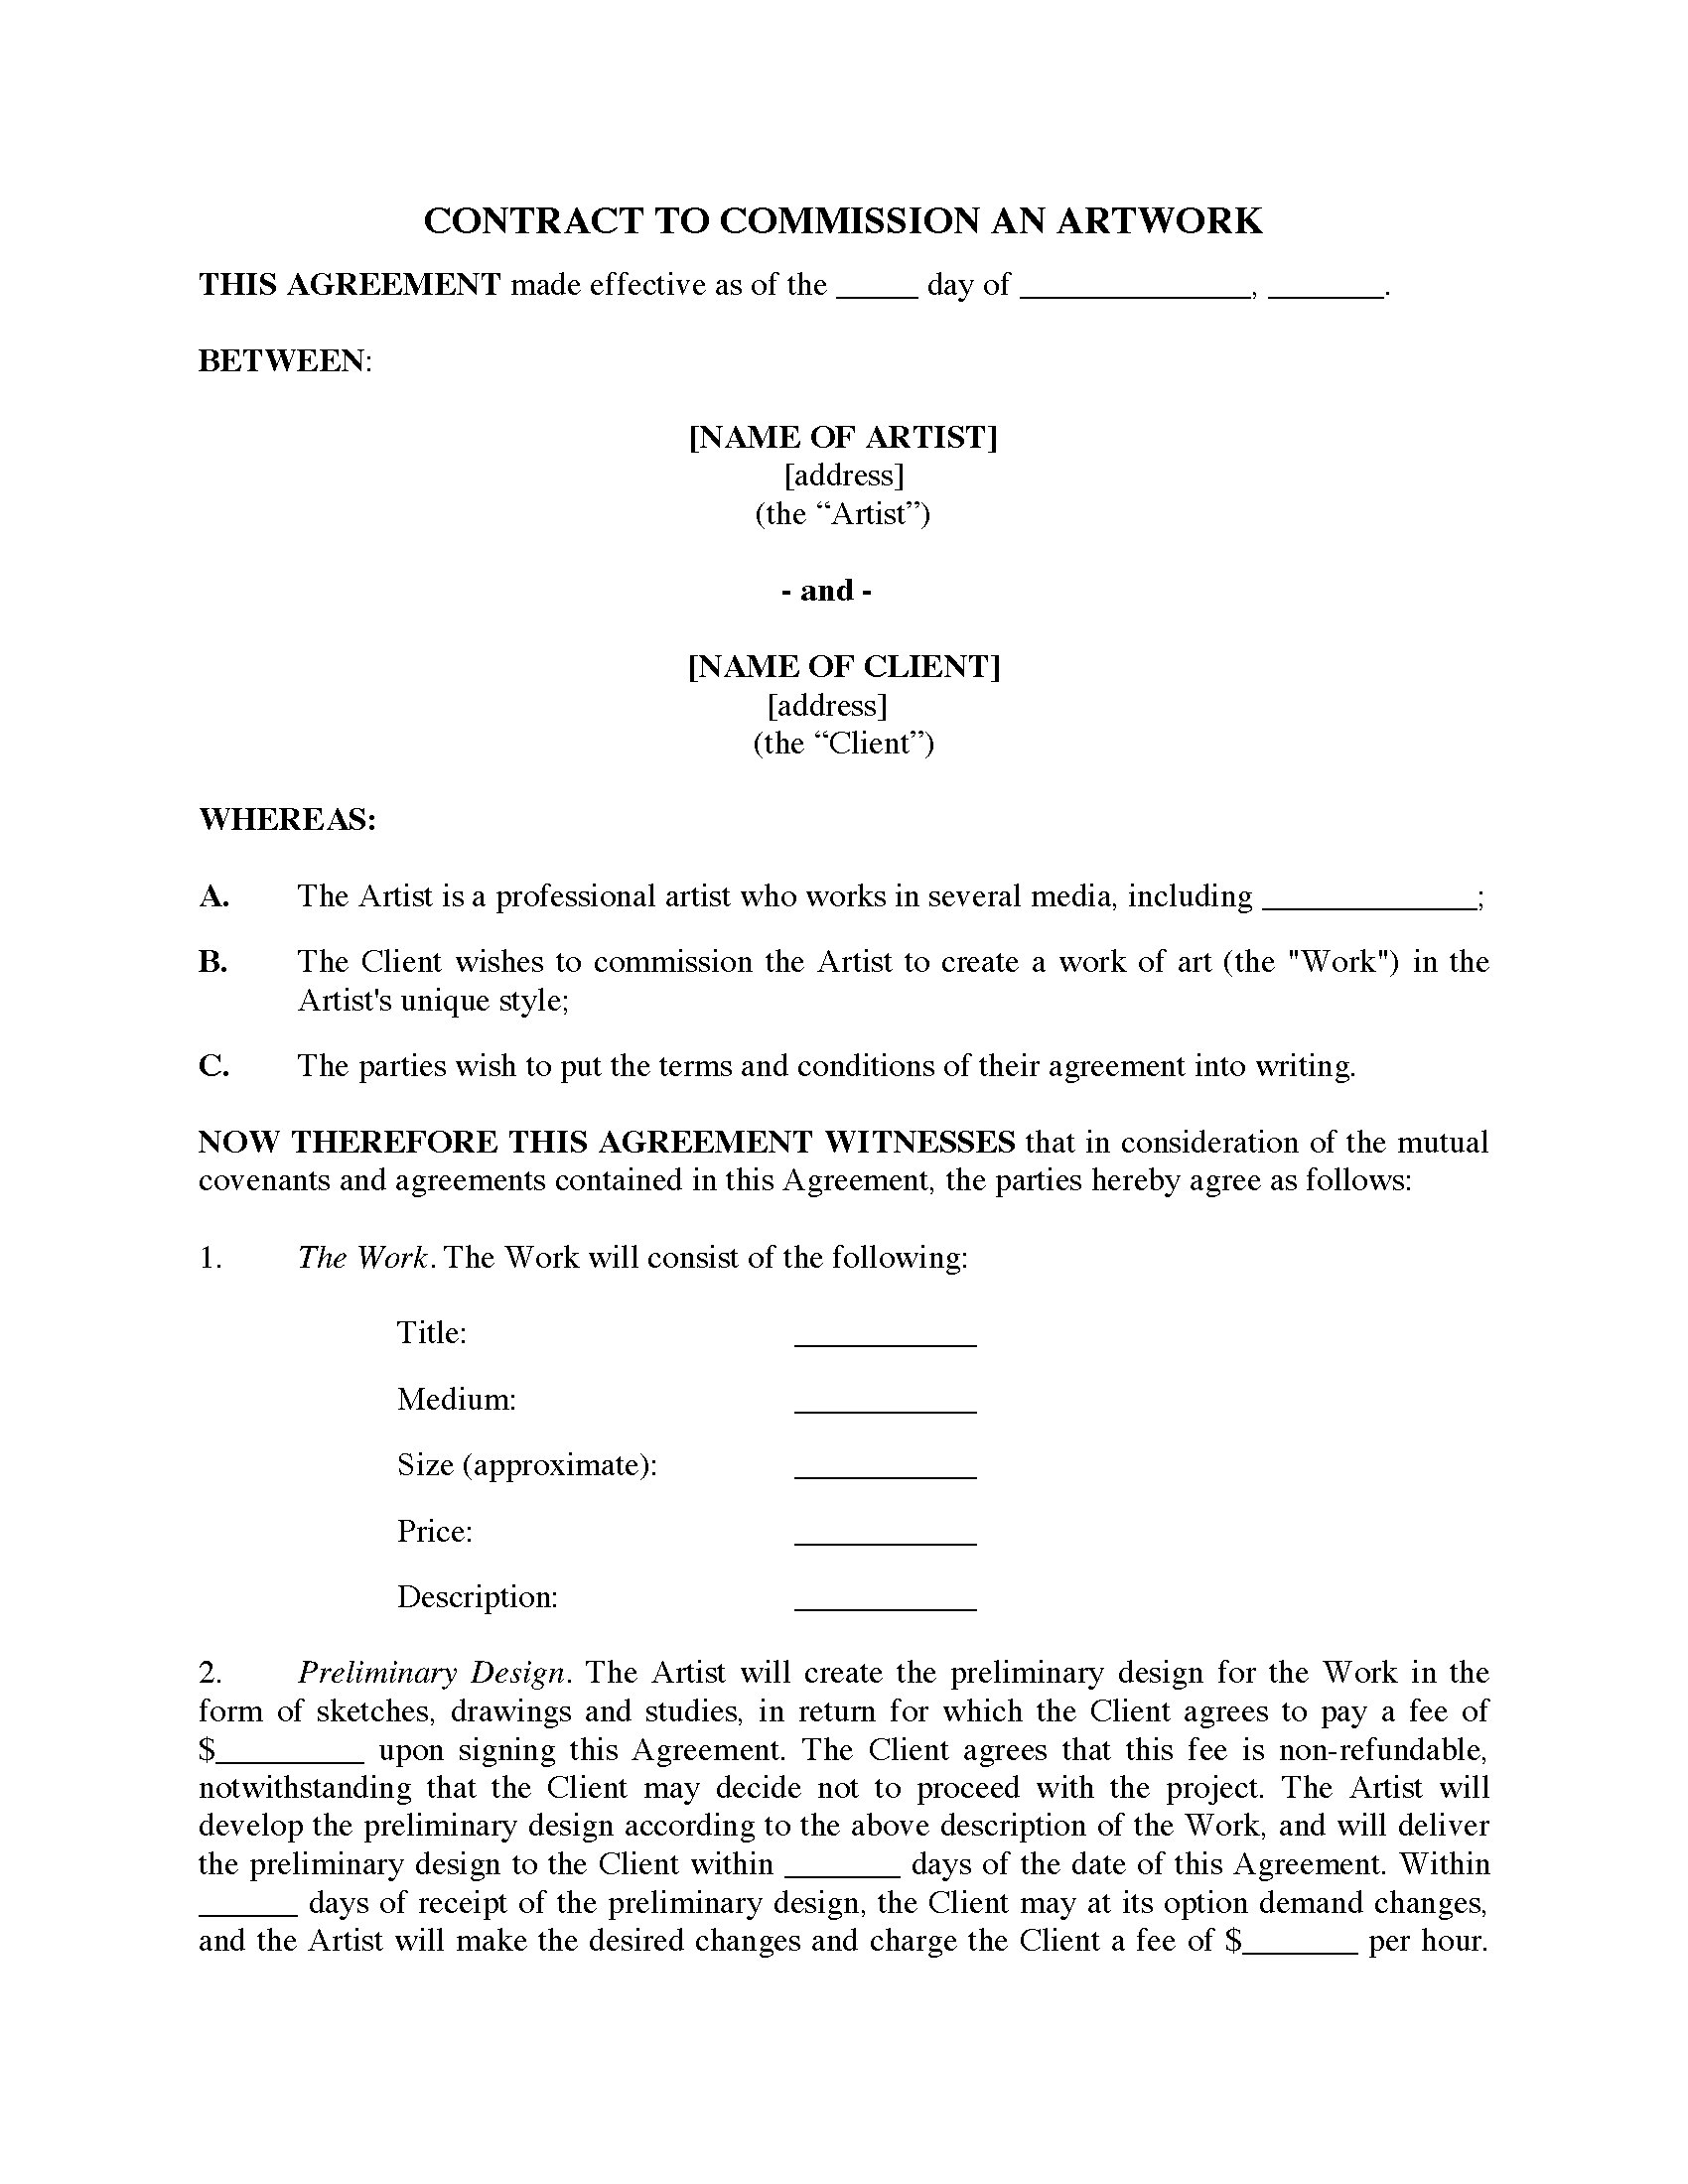 Sweat Equity Agreement Template Commission Contract For Original Art